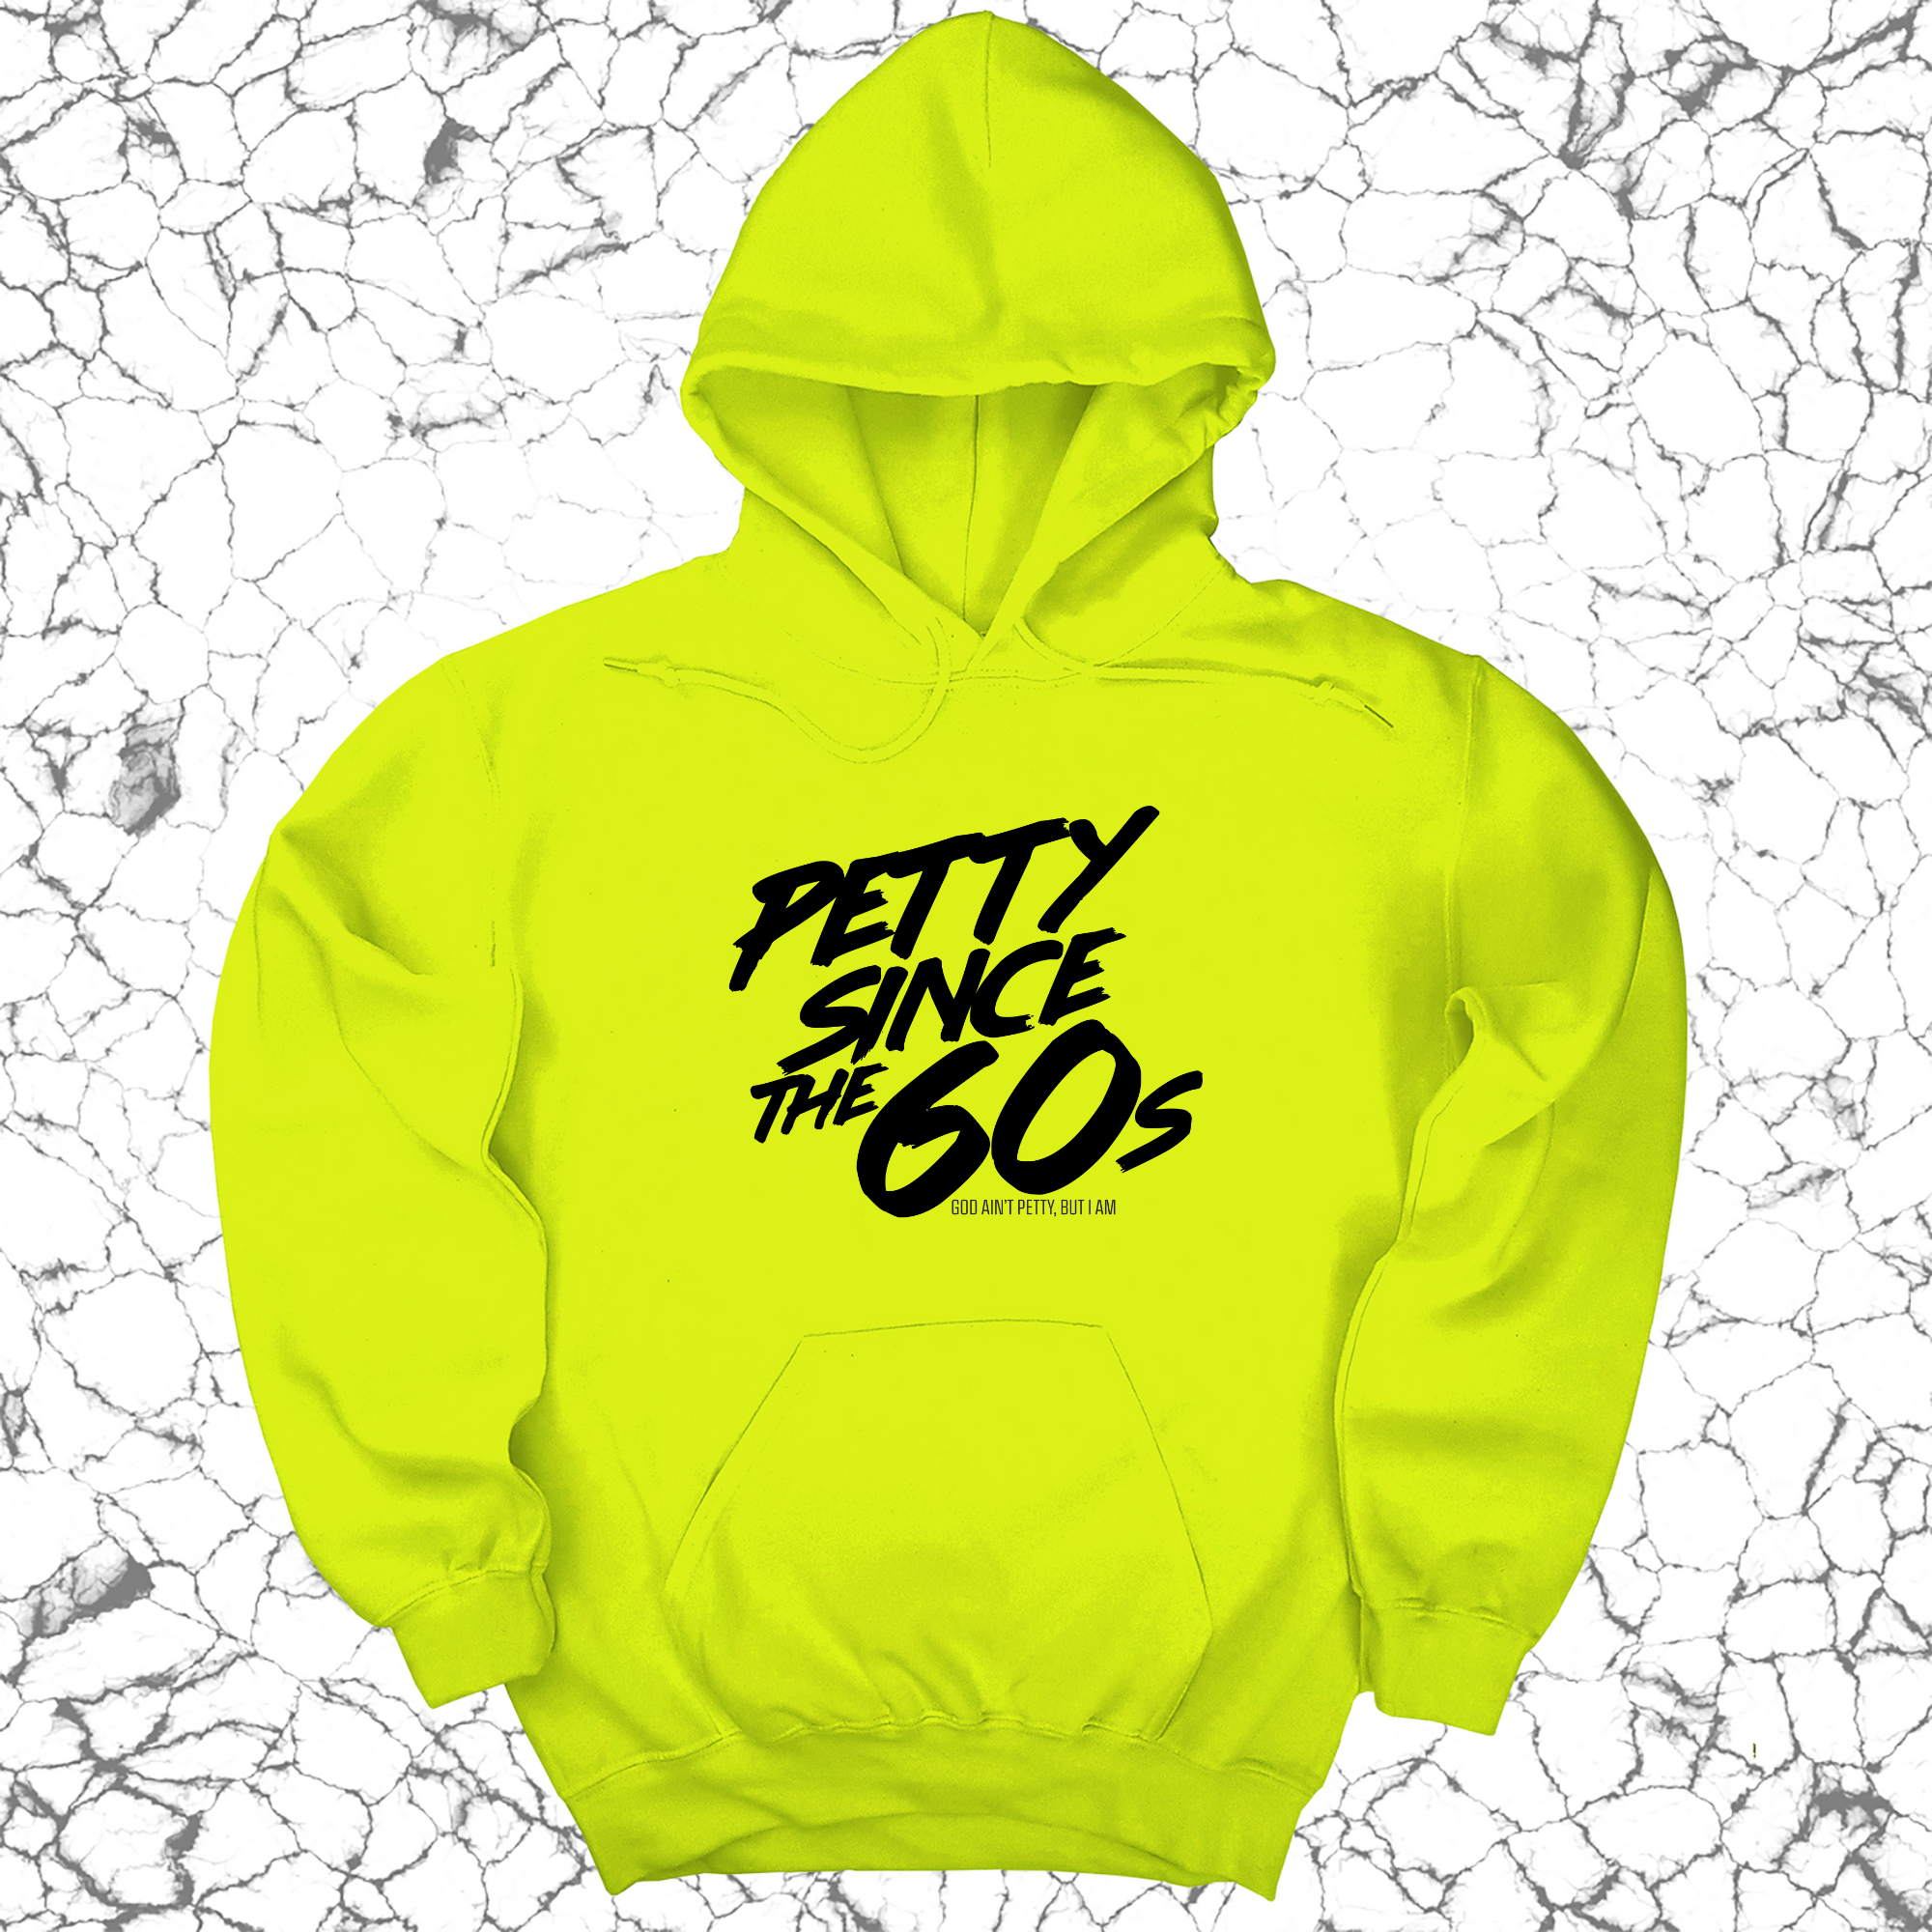 Petty Since the 60s Unisex Hoodies-Hoodie-The Original God Ain't Petty But I Am